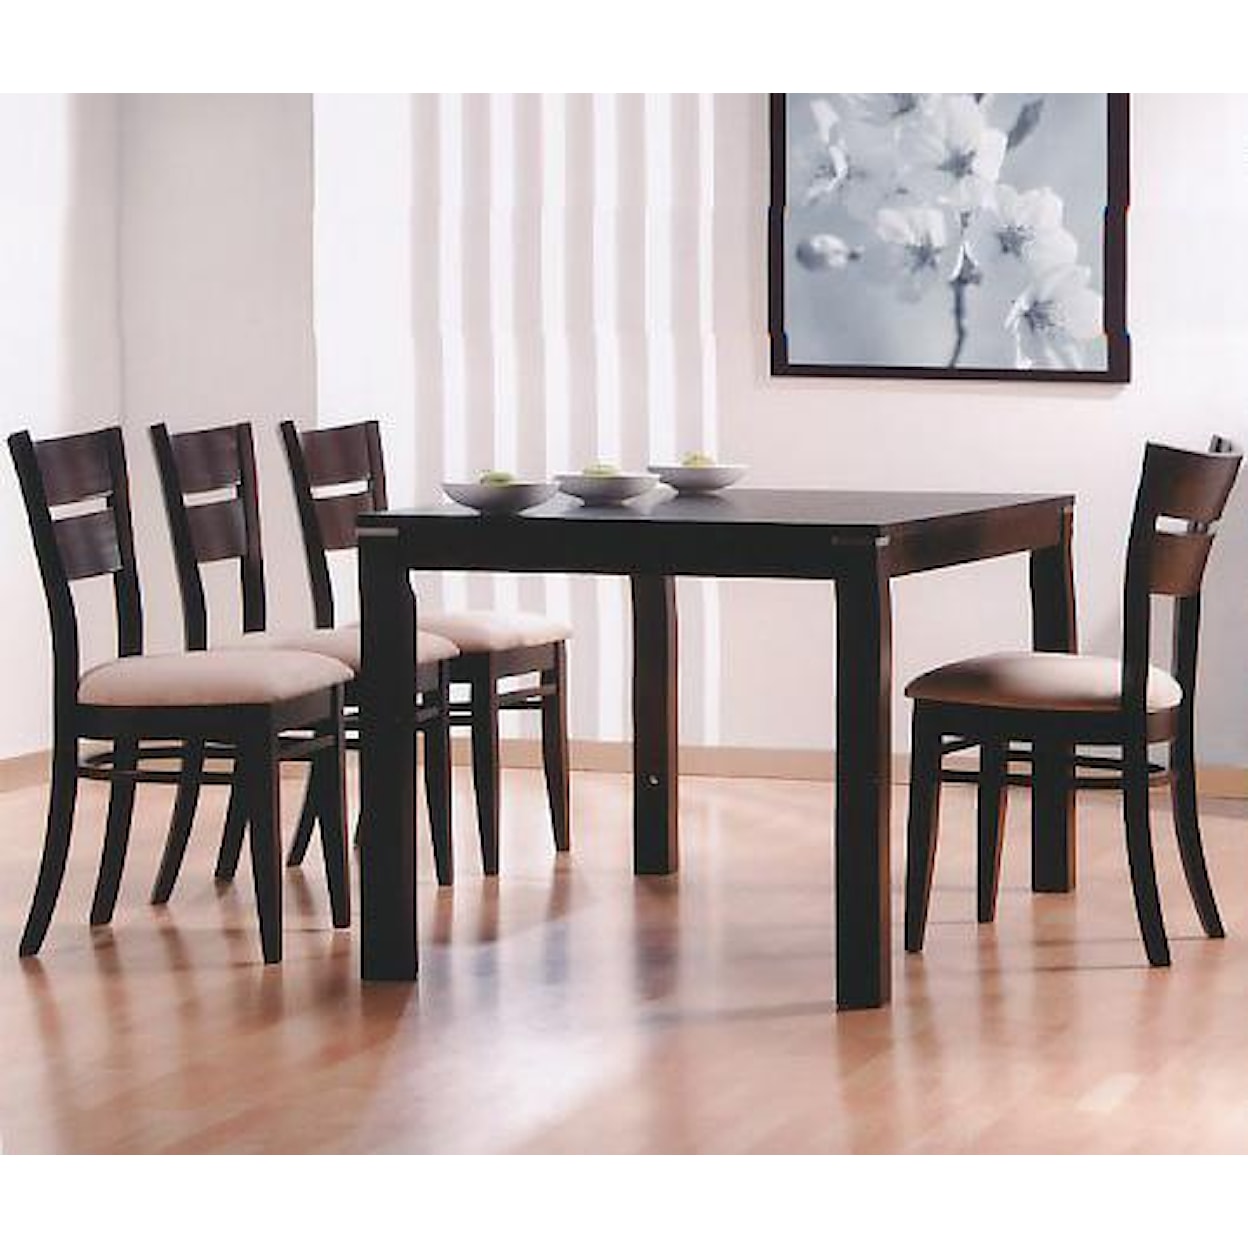 Primo International 6750 Table and 4 Chairs